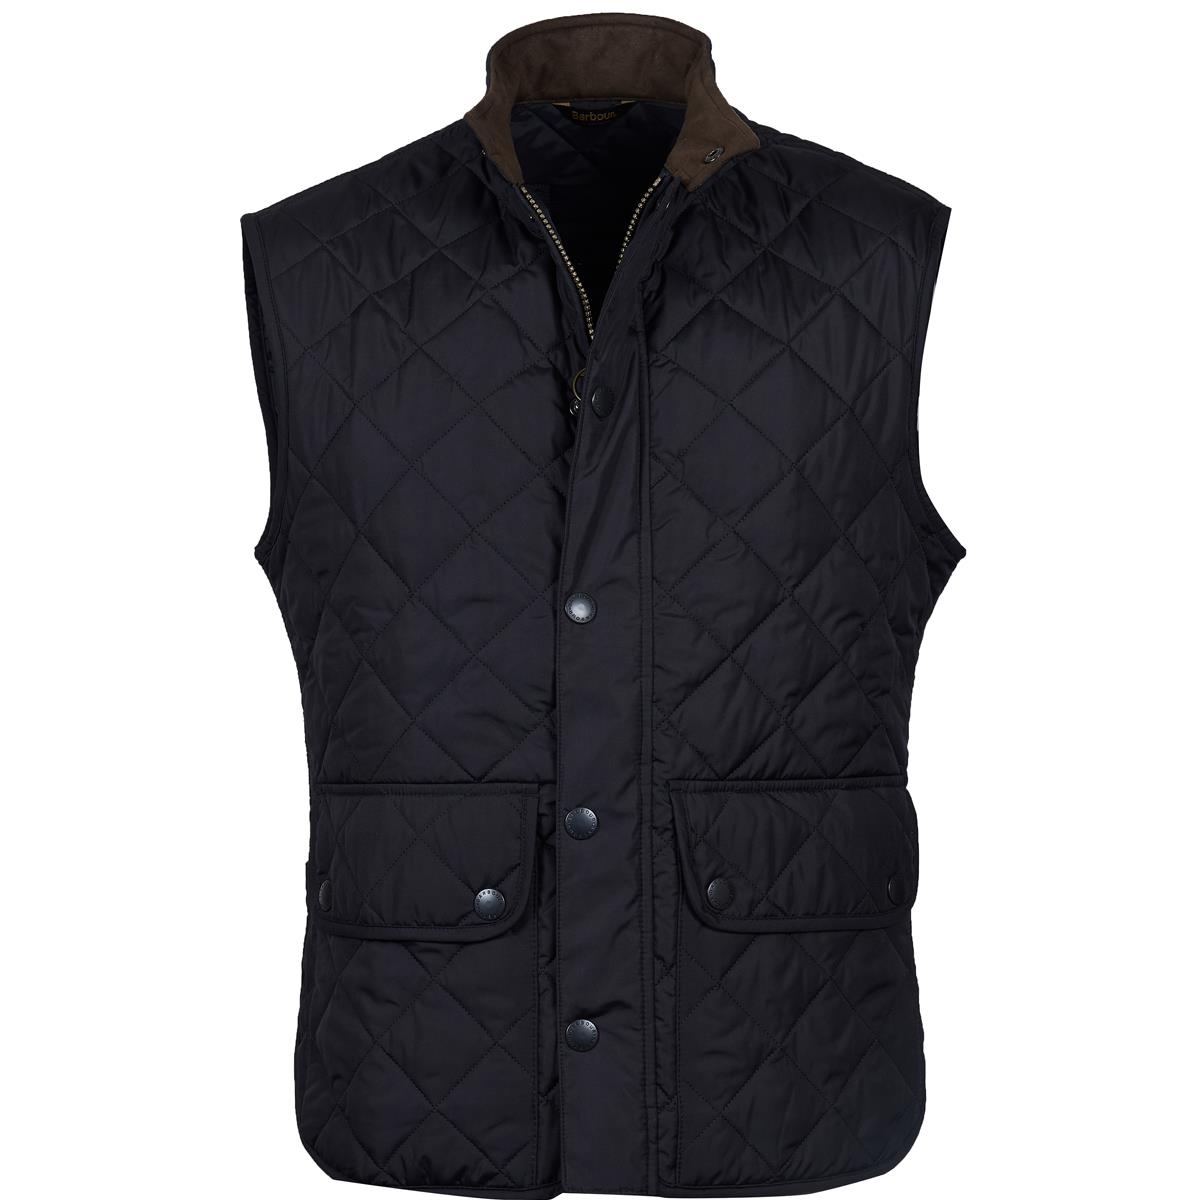 What would be the correct size for me in the Barbour Mens New Lowerdale Gilet?